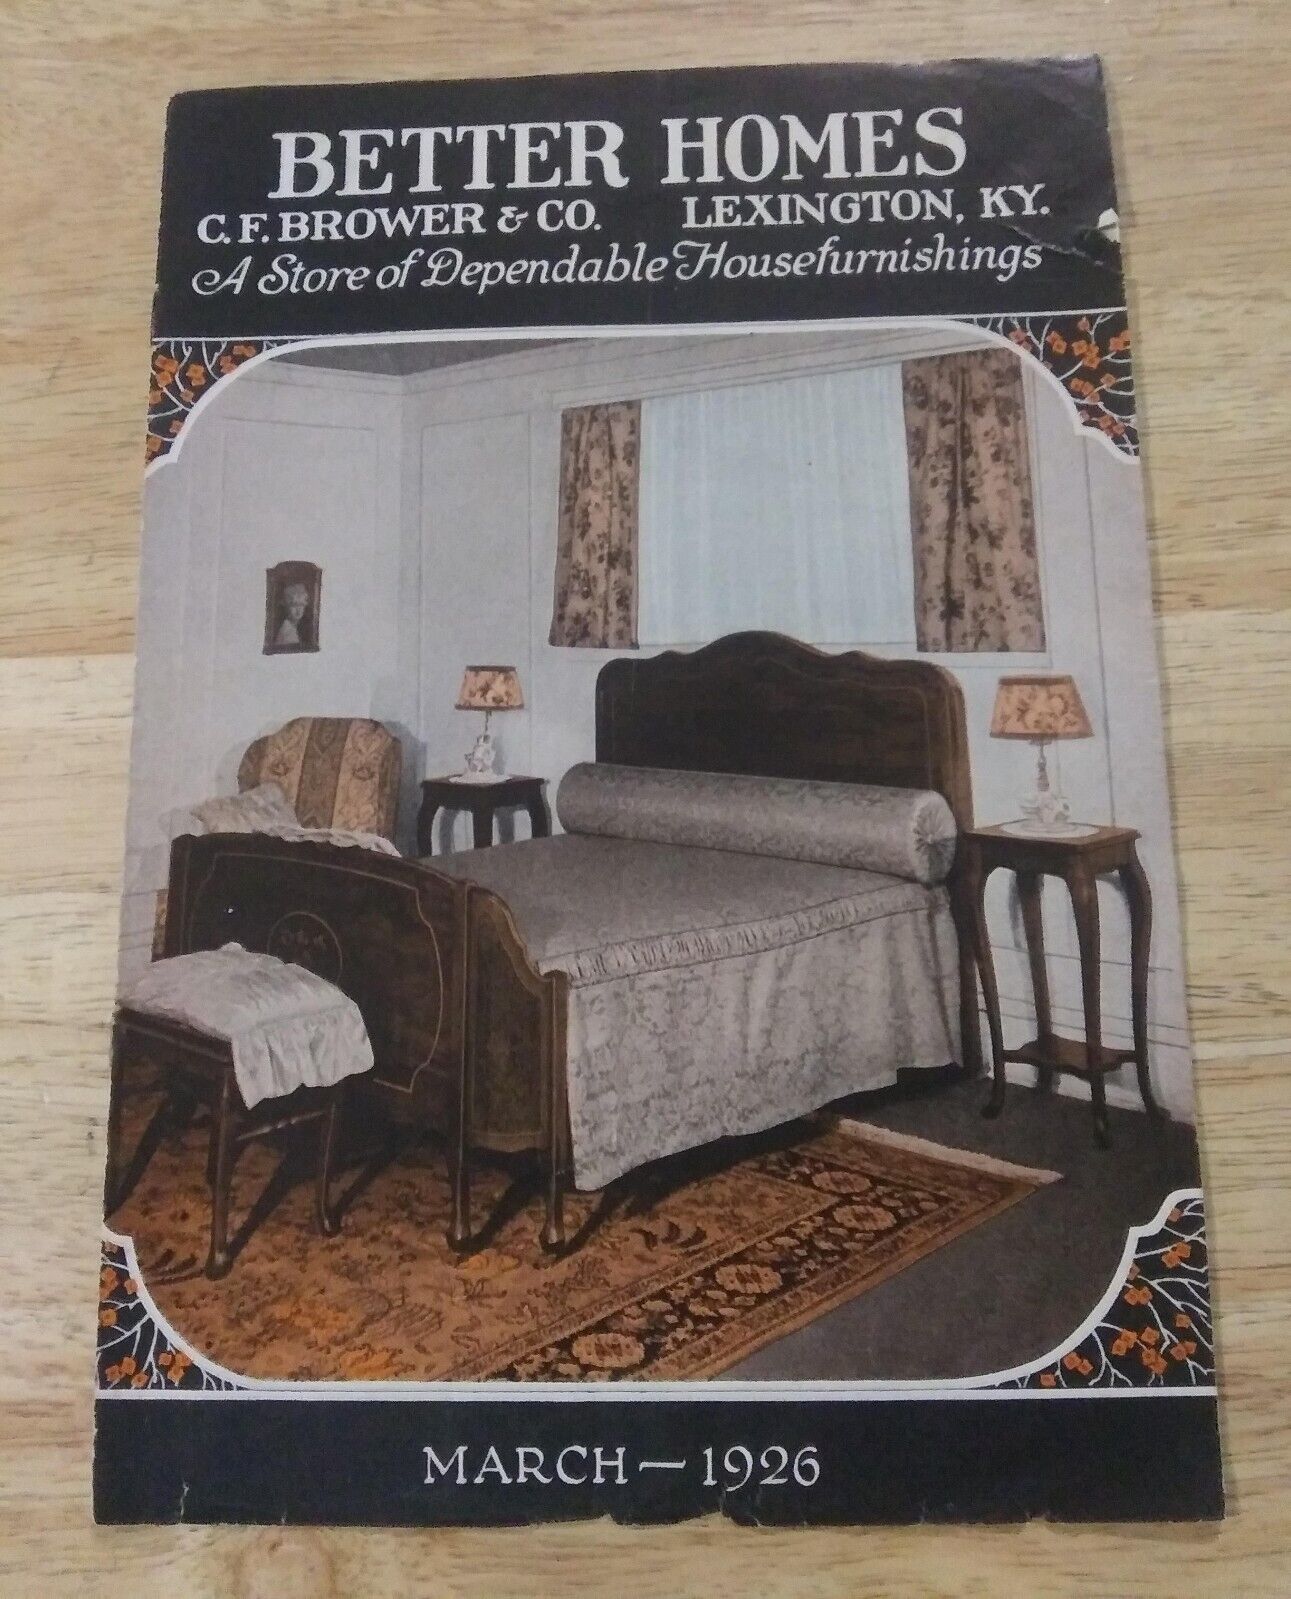 Better Homes C F Brower & Co Lexington KY Ad Catalog March 1926